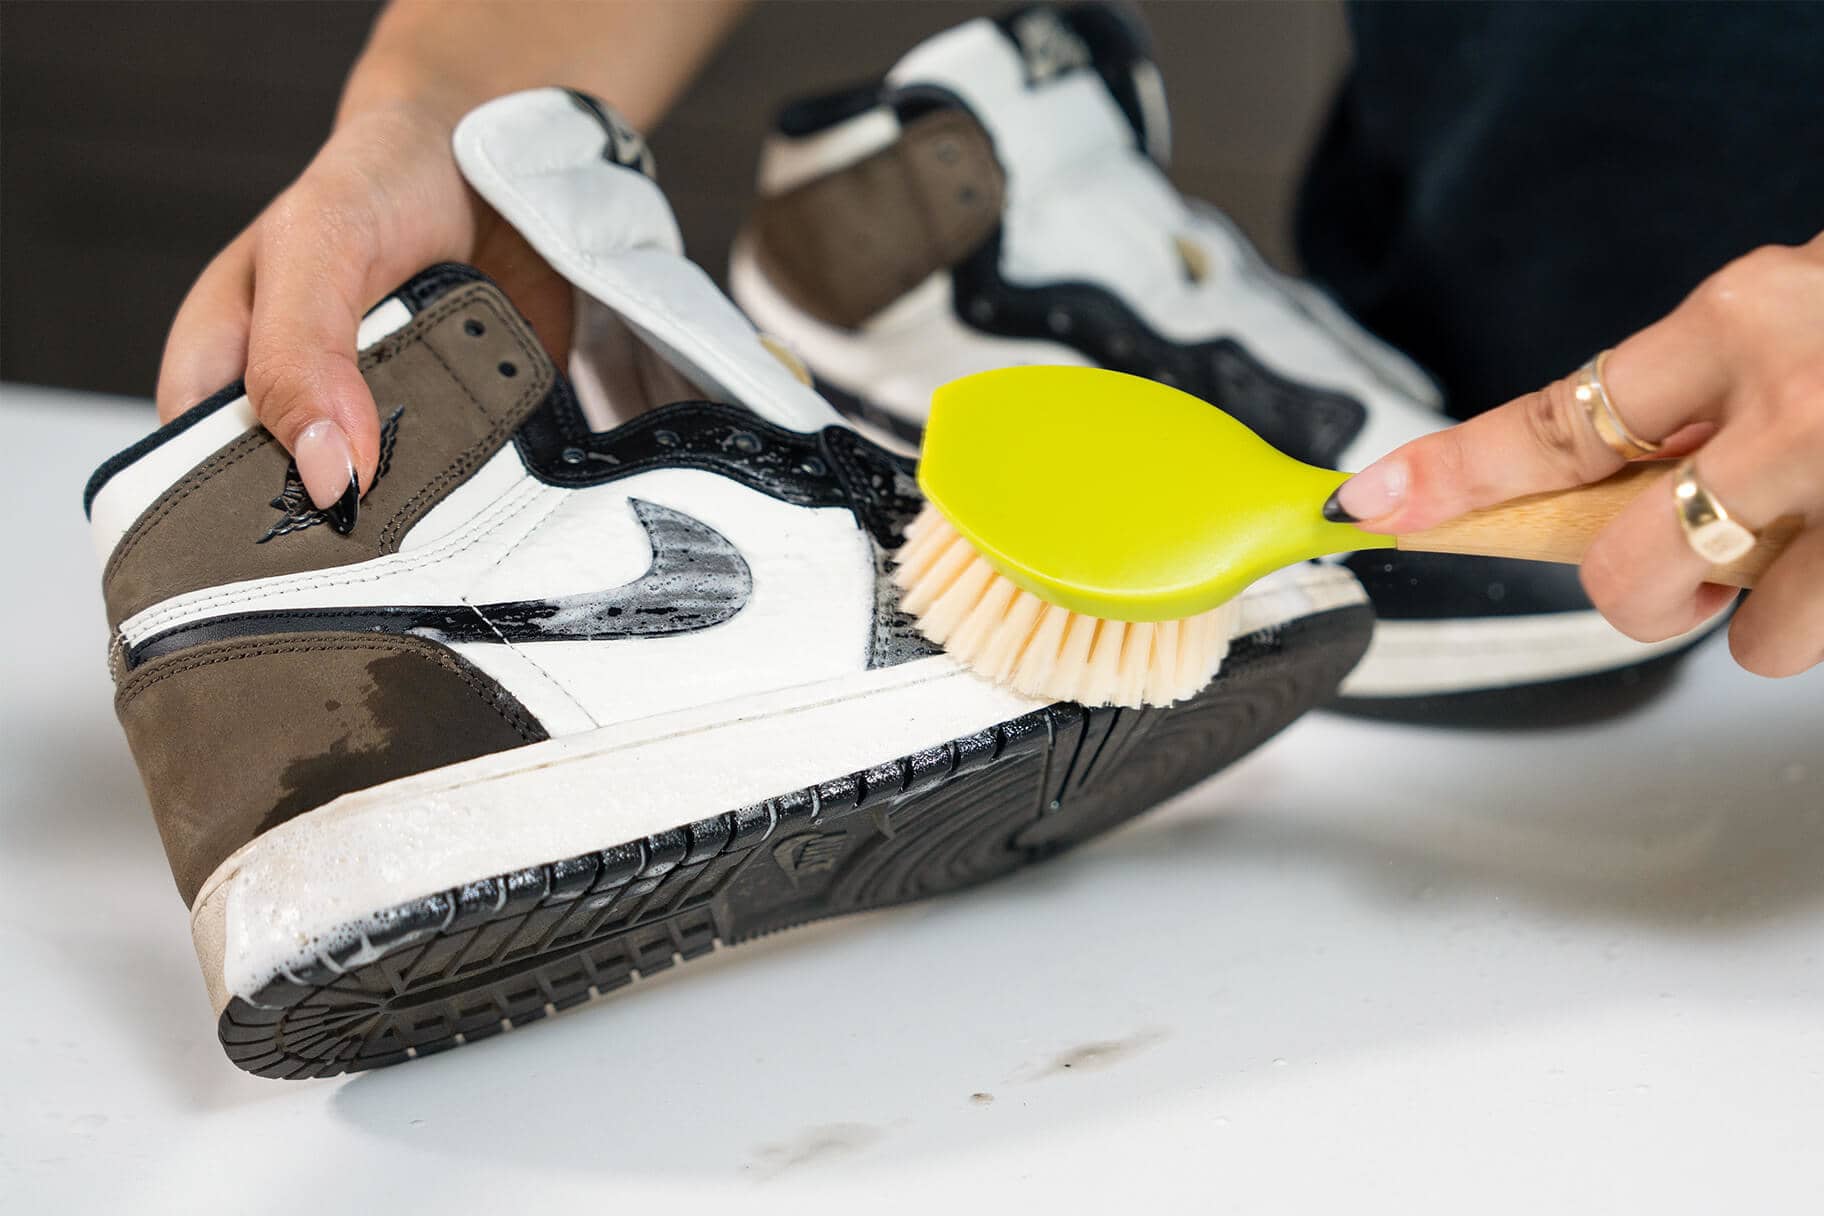 How To Clean Rubber On Shoes How to Clean Your Shoes in 6 Easy Steps. Nike.com